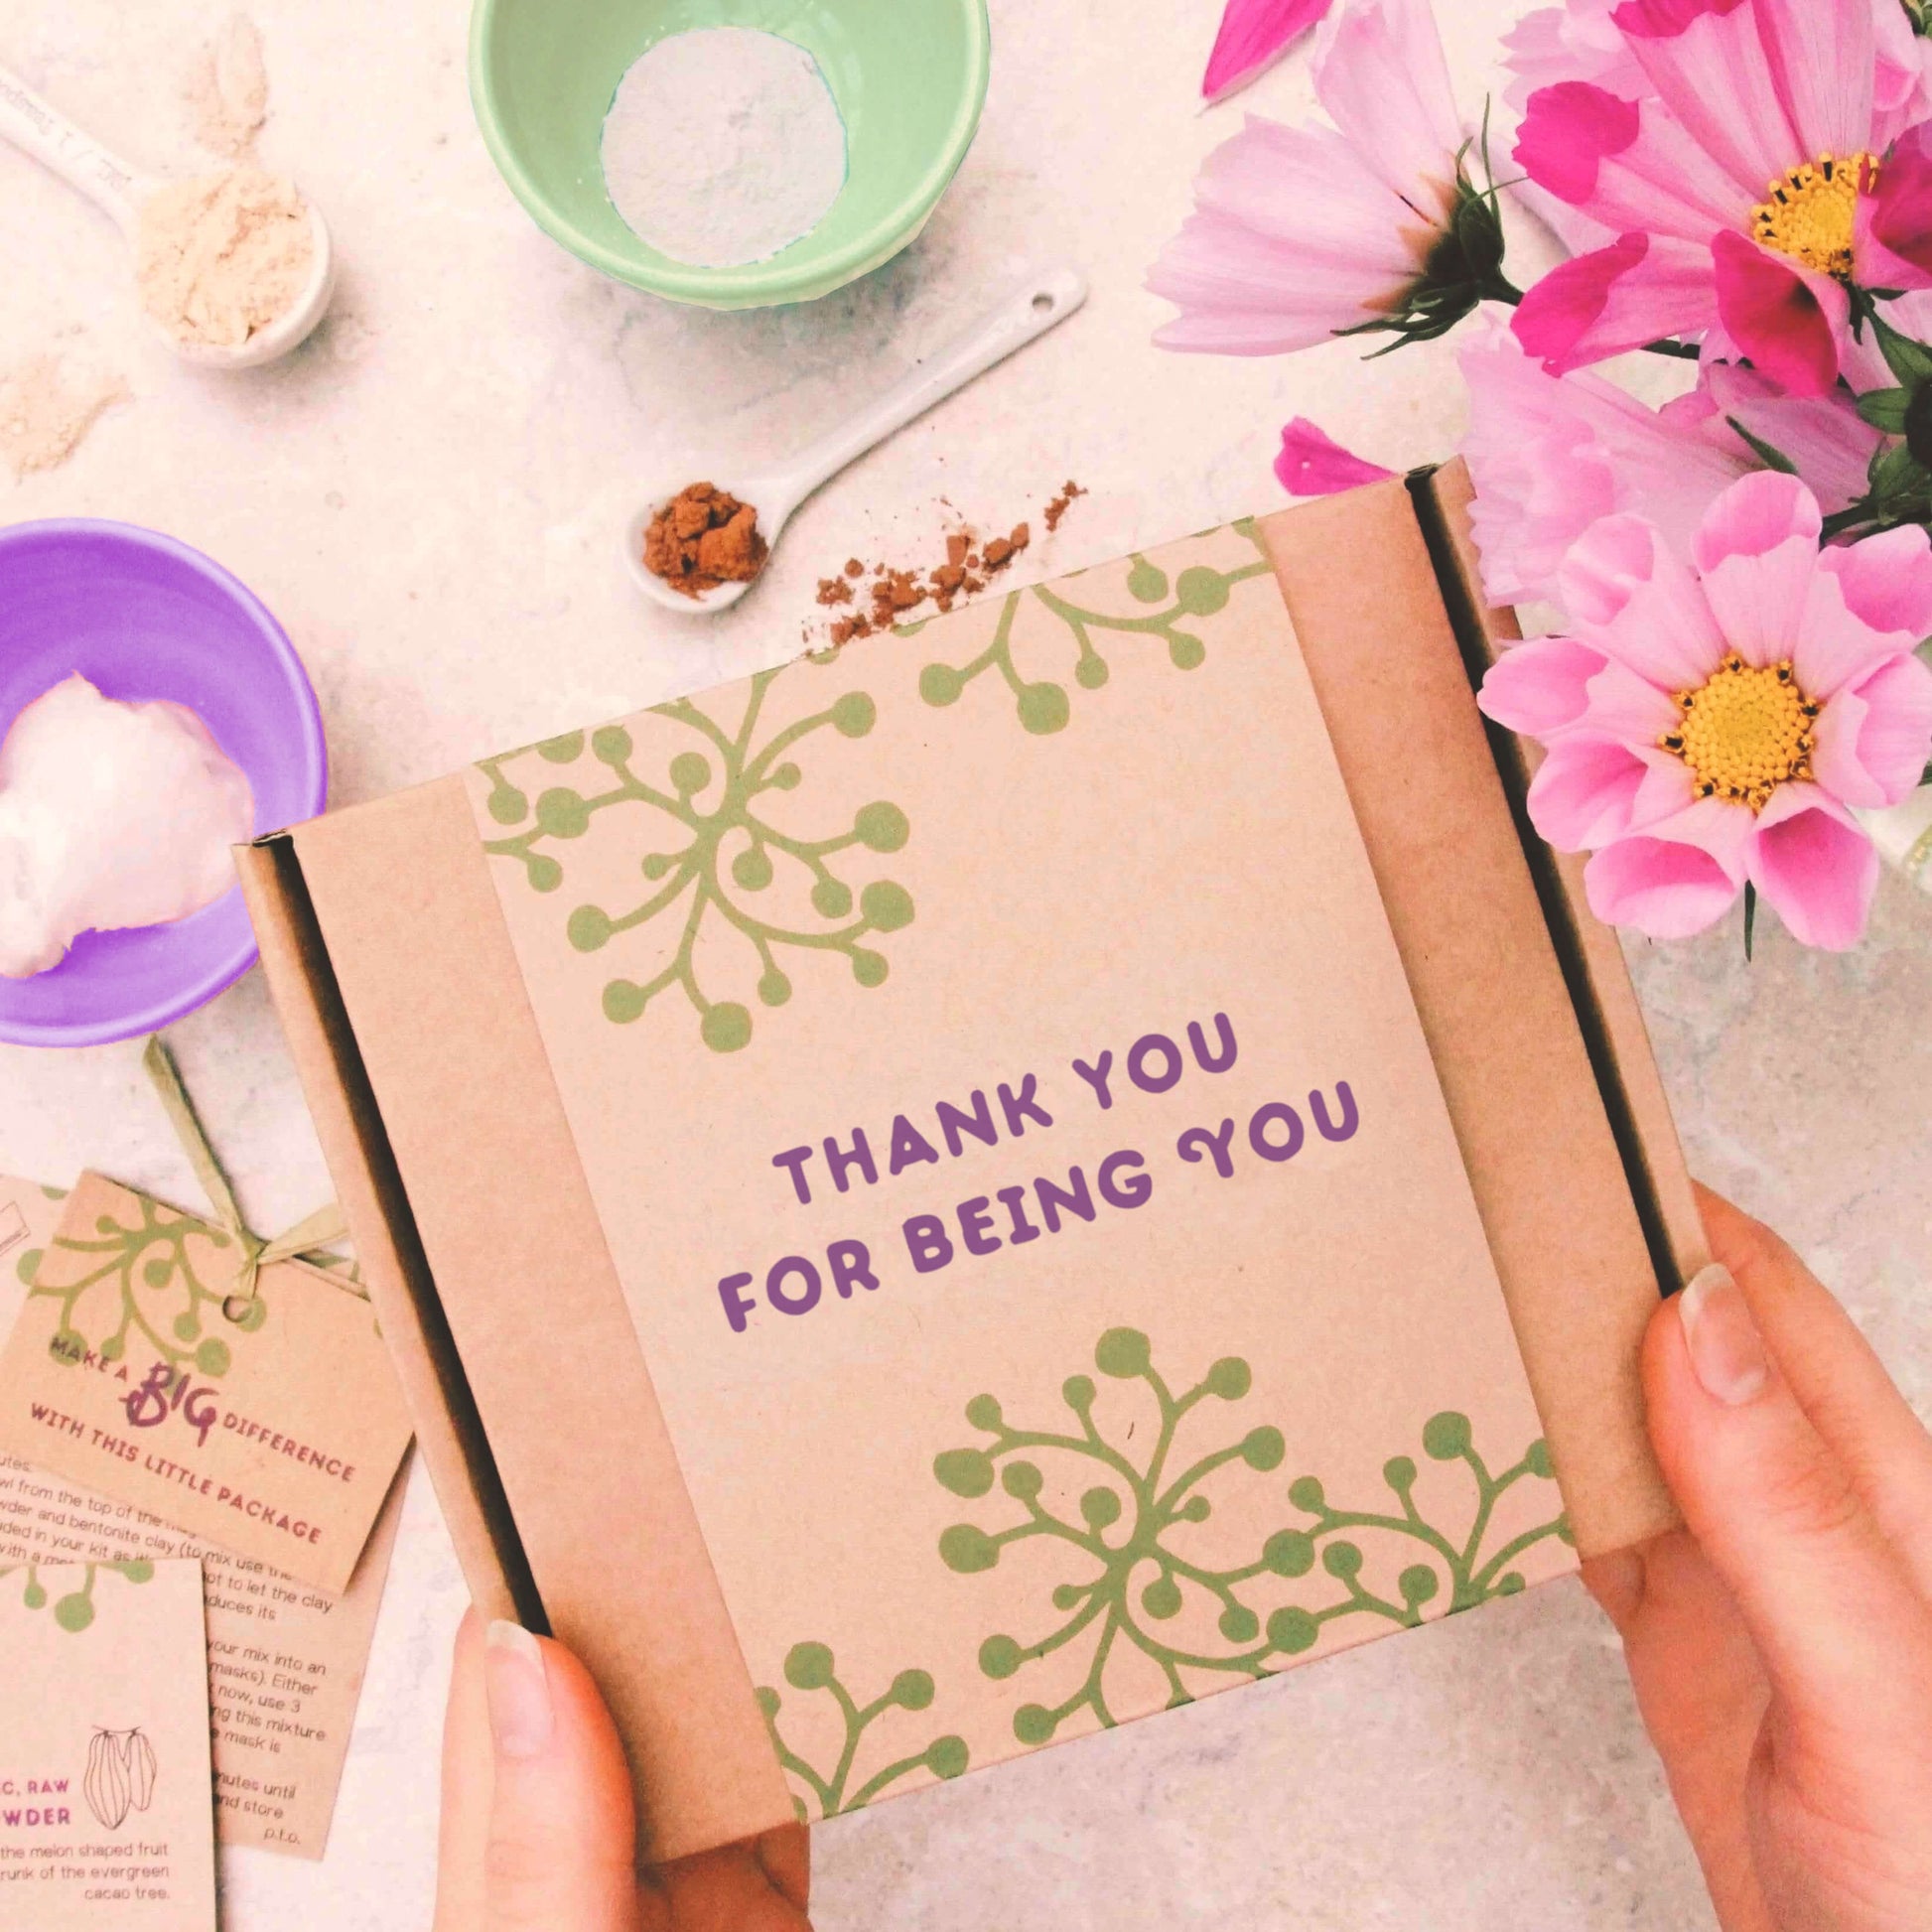 best friend letterbox gift with gift message 'thank you for being you'